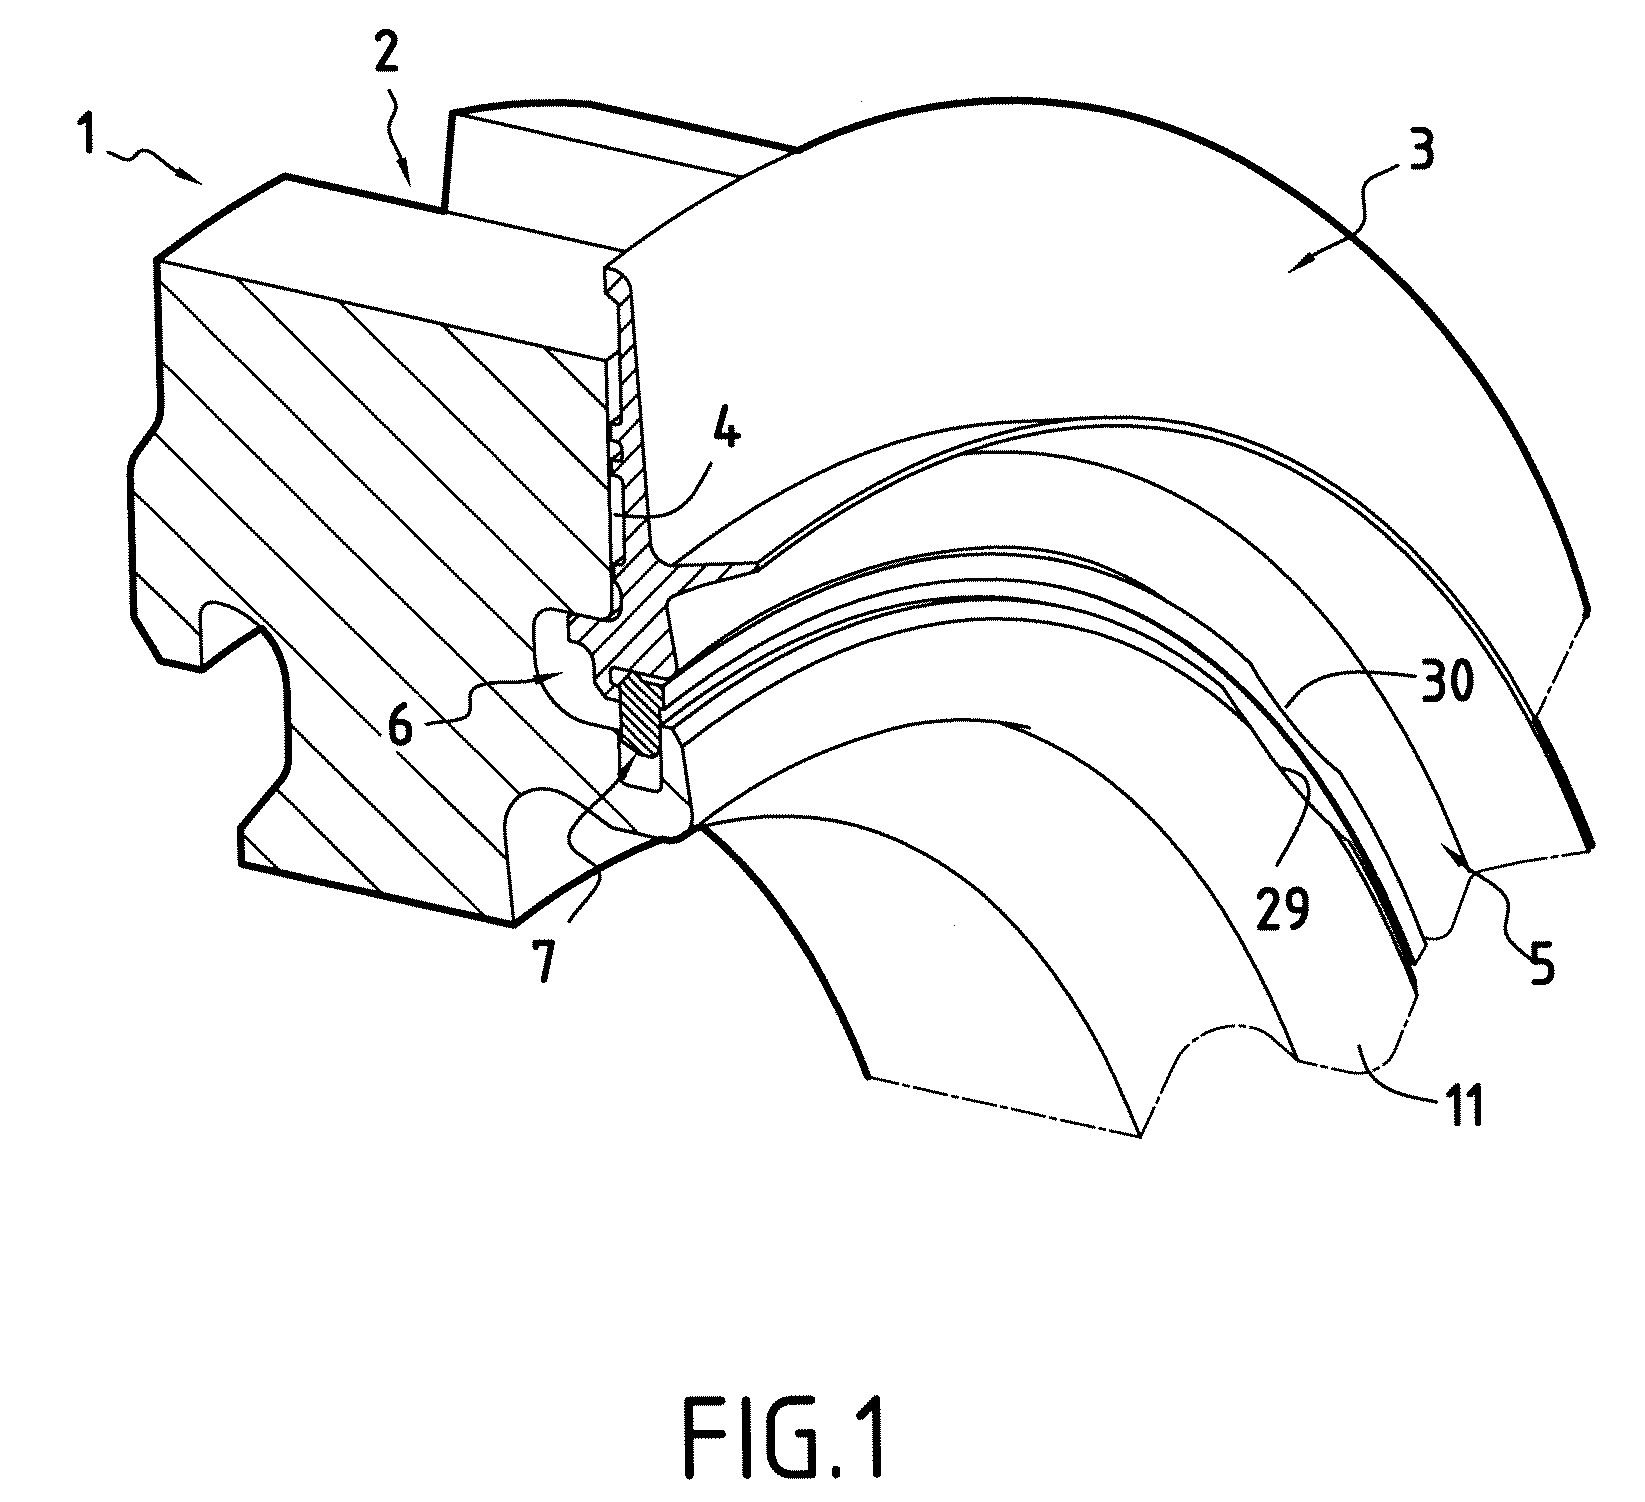 Retaining device for axially retaining a rotor disk flange in a turbomachine